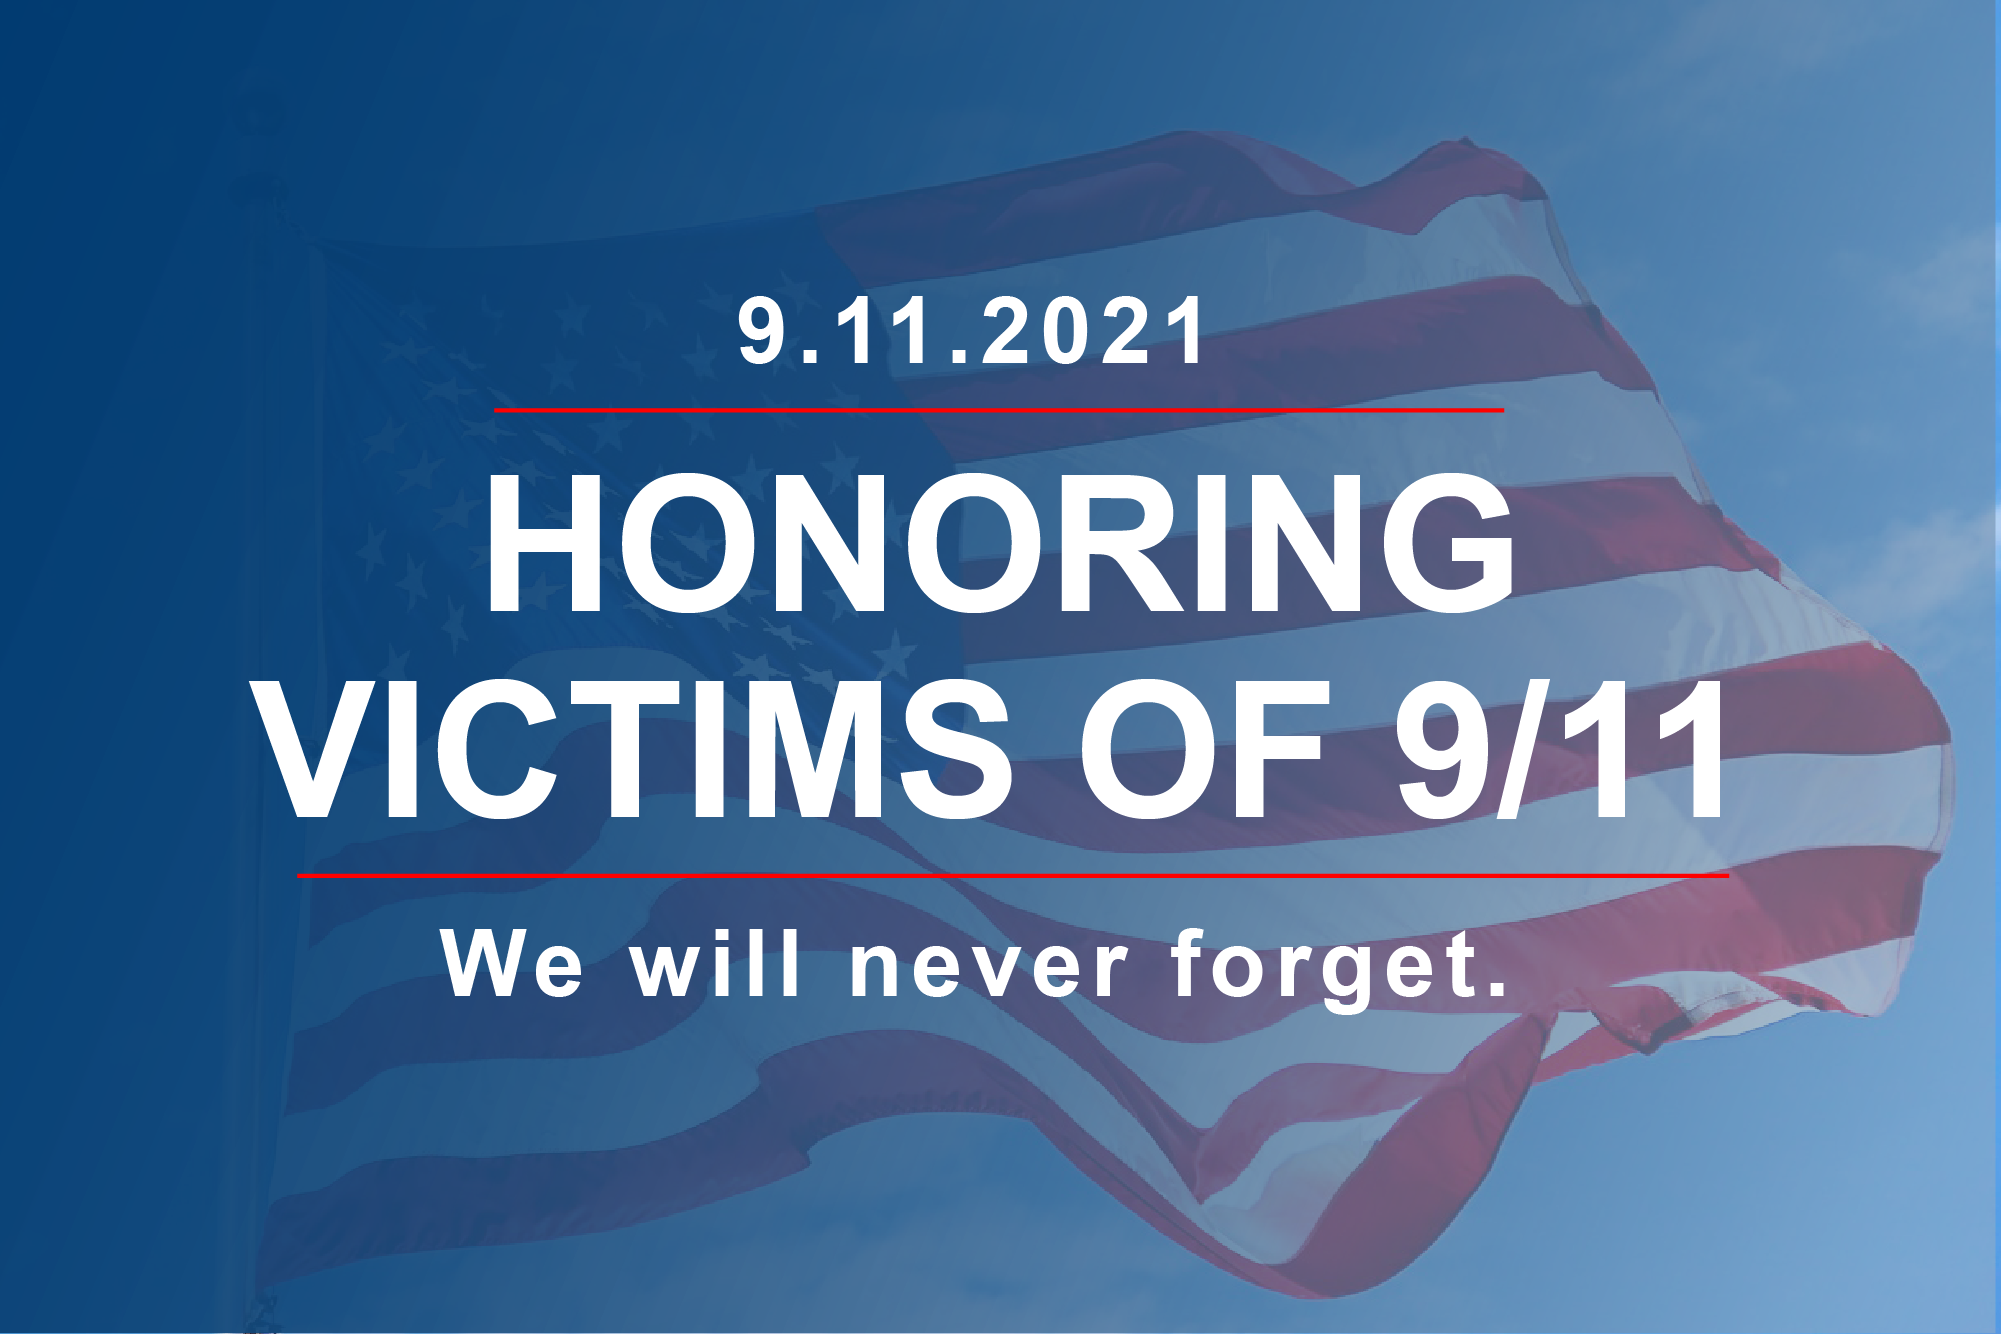 9.11.2021: Honoring Victims of 9/11. We will never forget.